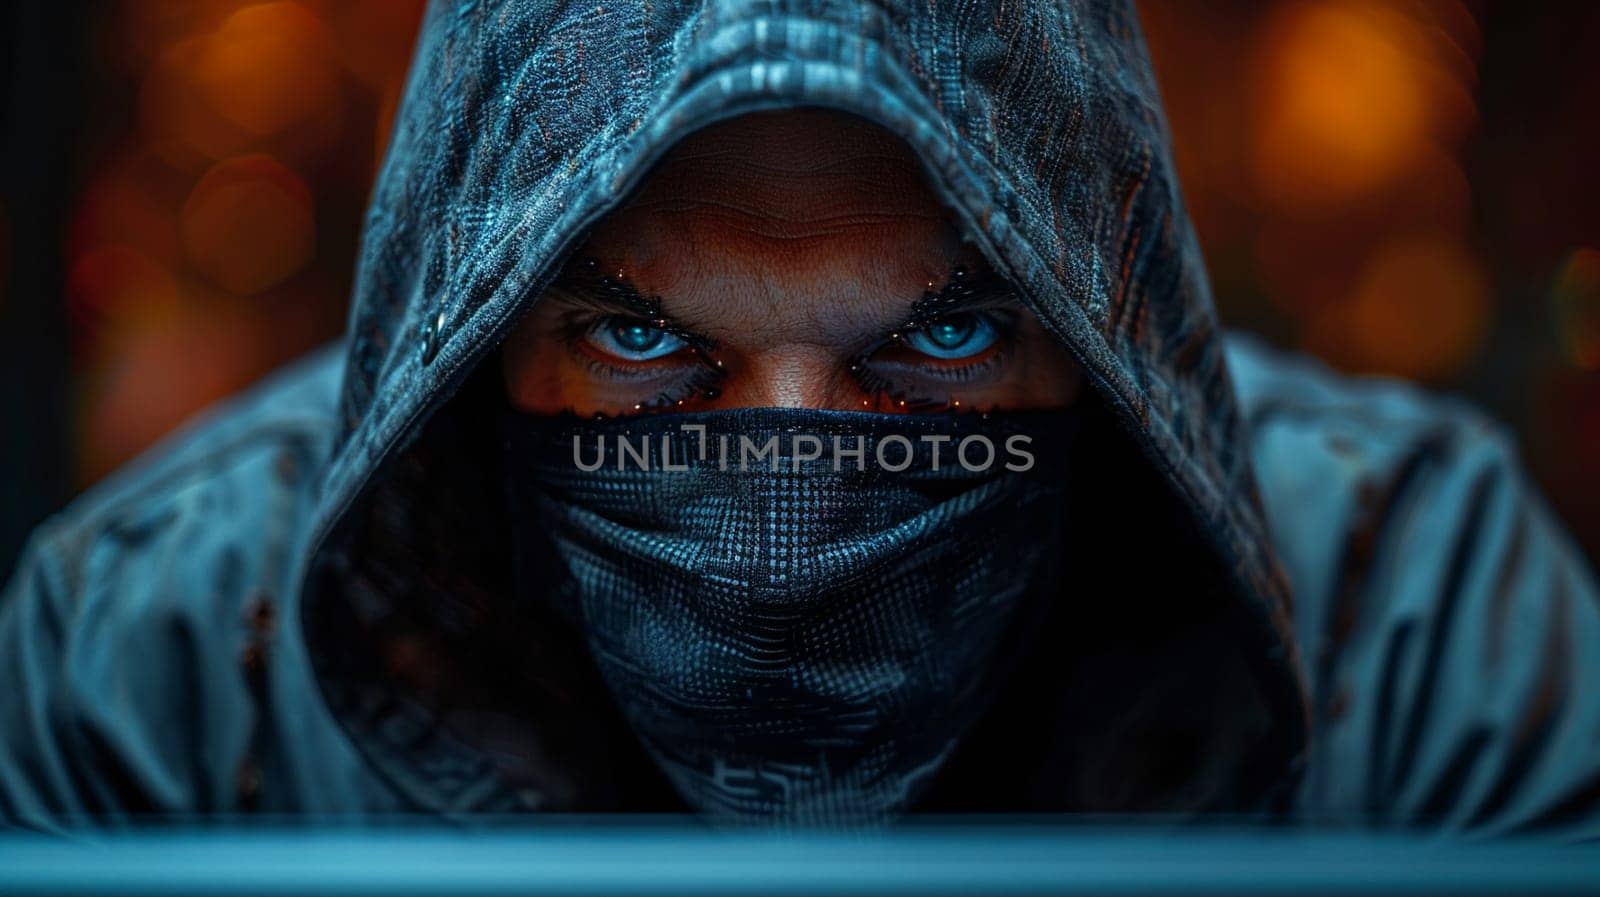 Intense portrait of enigmatic cyber criminal as hacker penetrates security, features glaring blue eyes and digital mask in shadowy setting